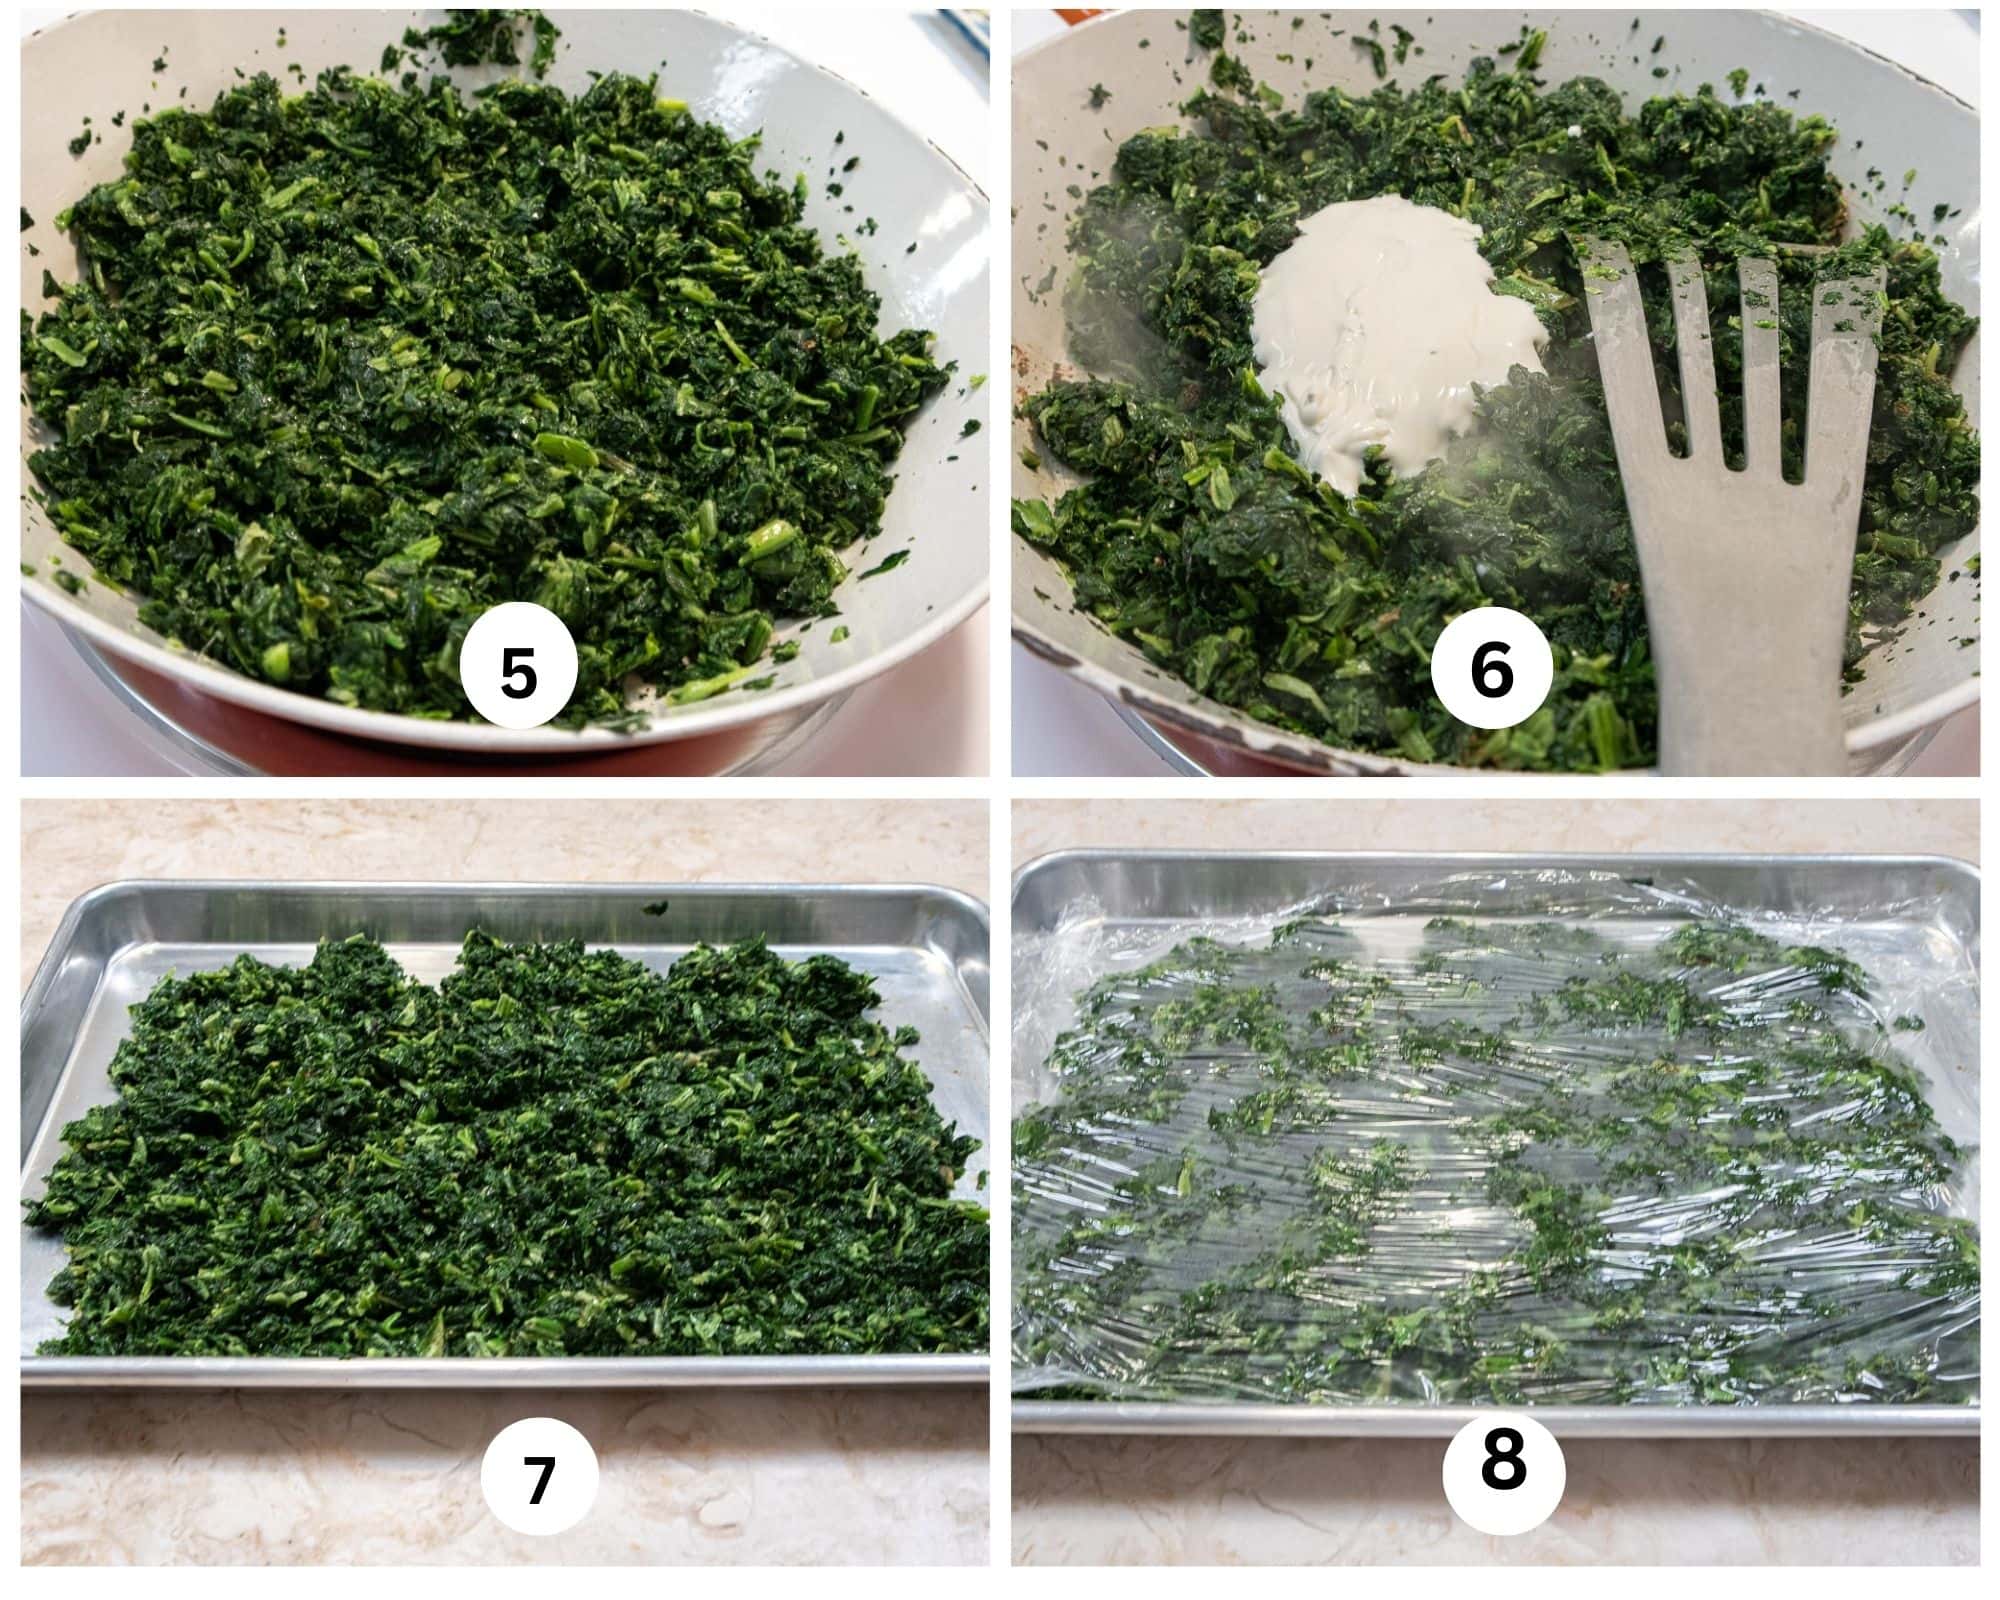 The second collage shows the spinach filling being sauteed, the cream added, laid out on a tray to cool and covered with plastic wrap.